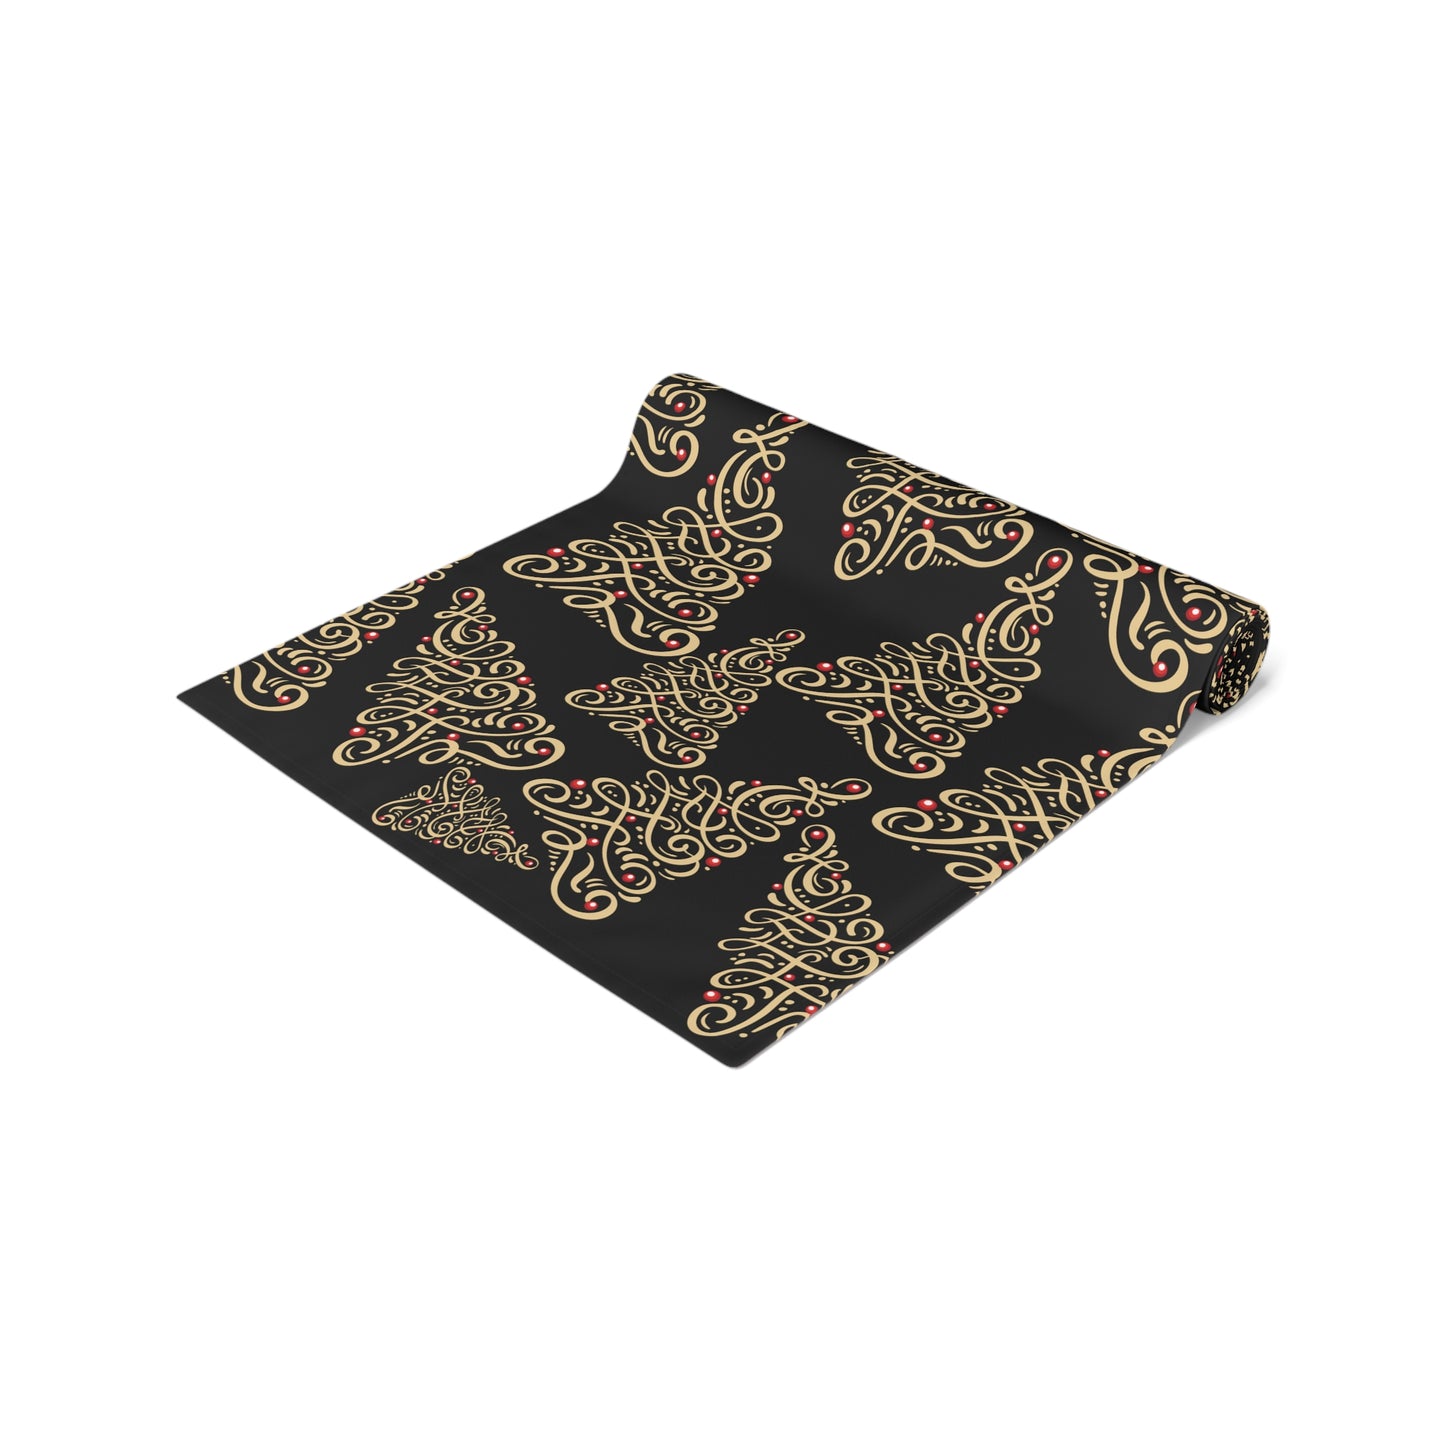 Black And Gold Christmas Tree Table Runner